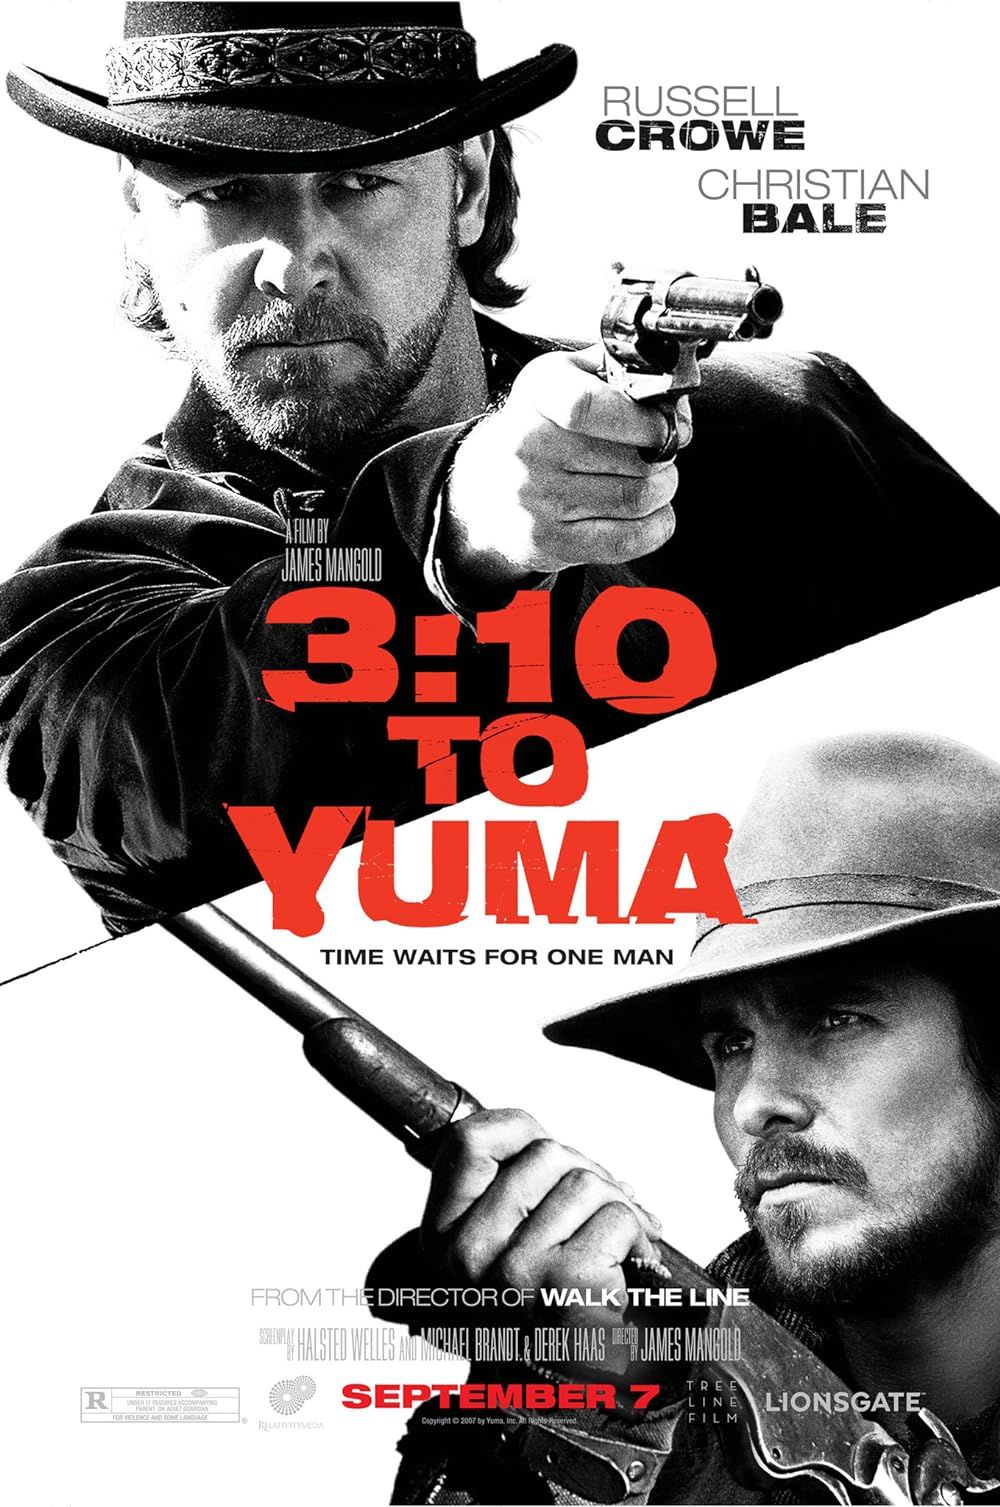 Russell Crowe and Christian Bale wielding guns on the poster of 3 10 to Yuma